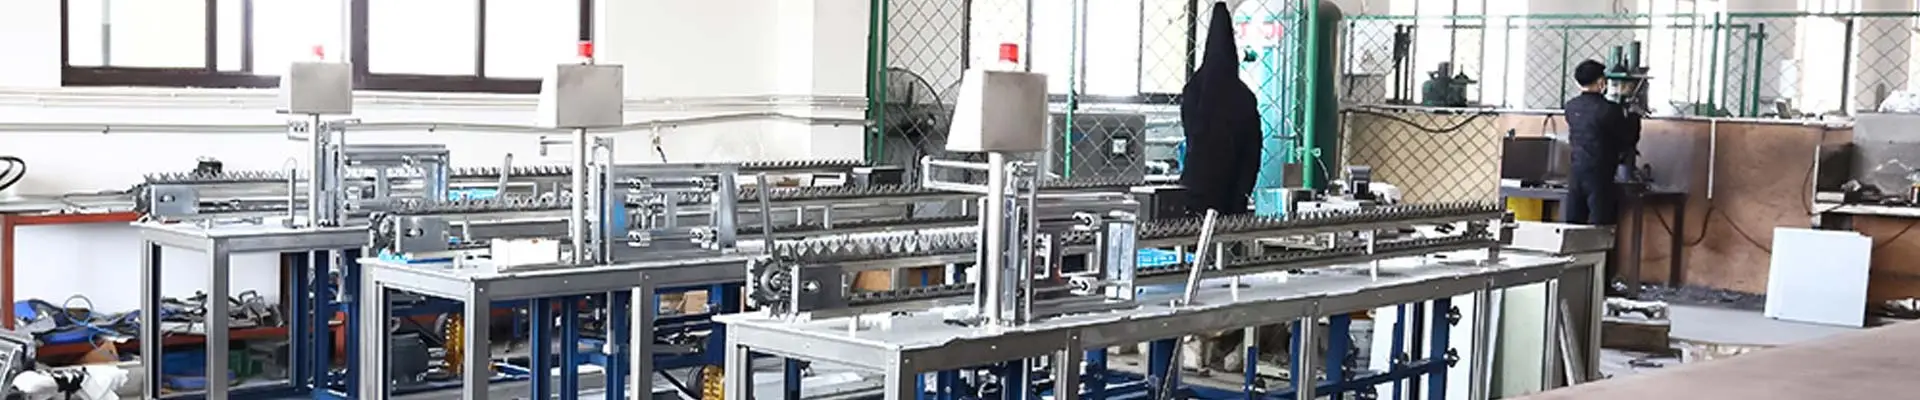 Medical Mold & Products Making Machine